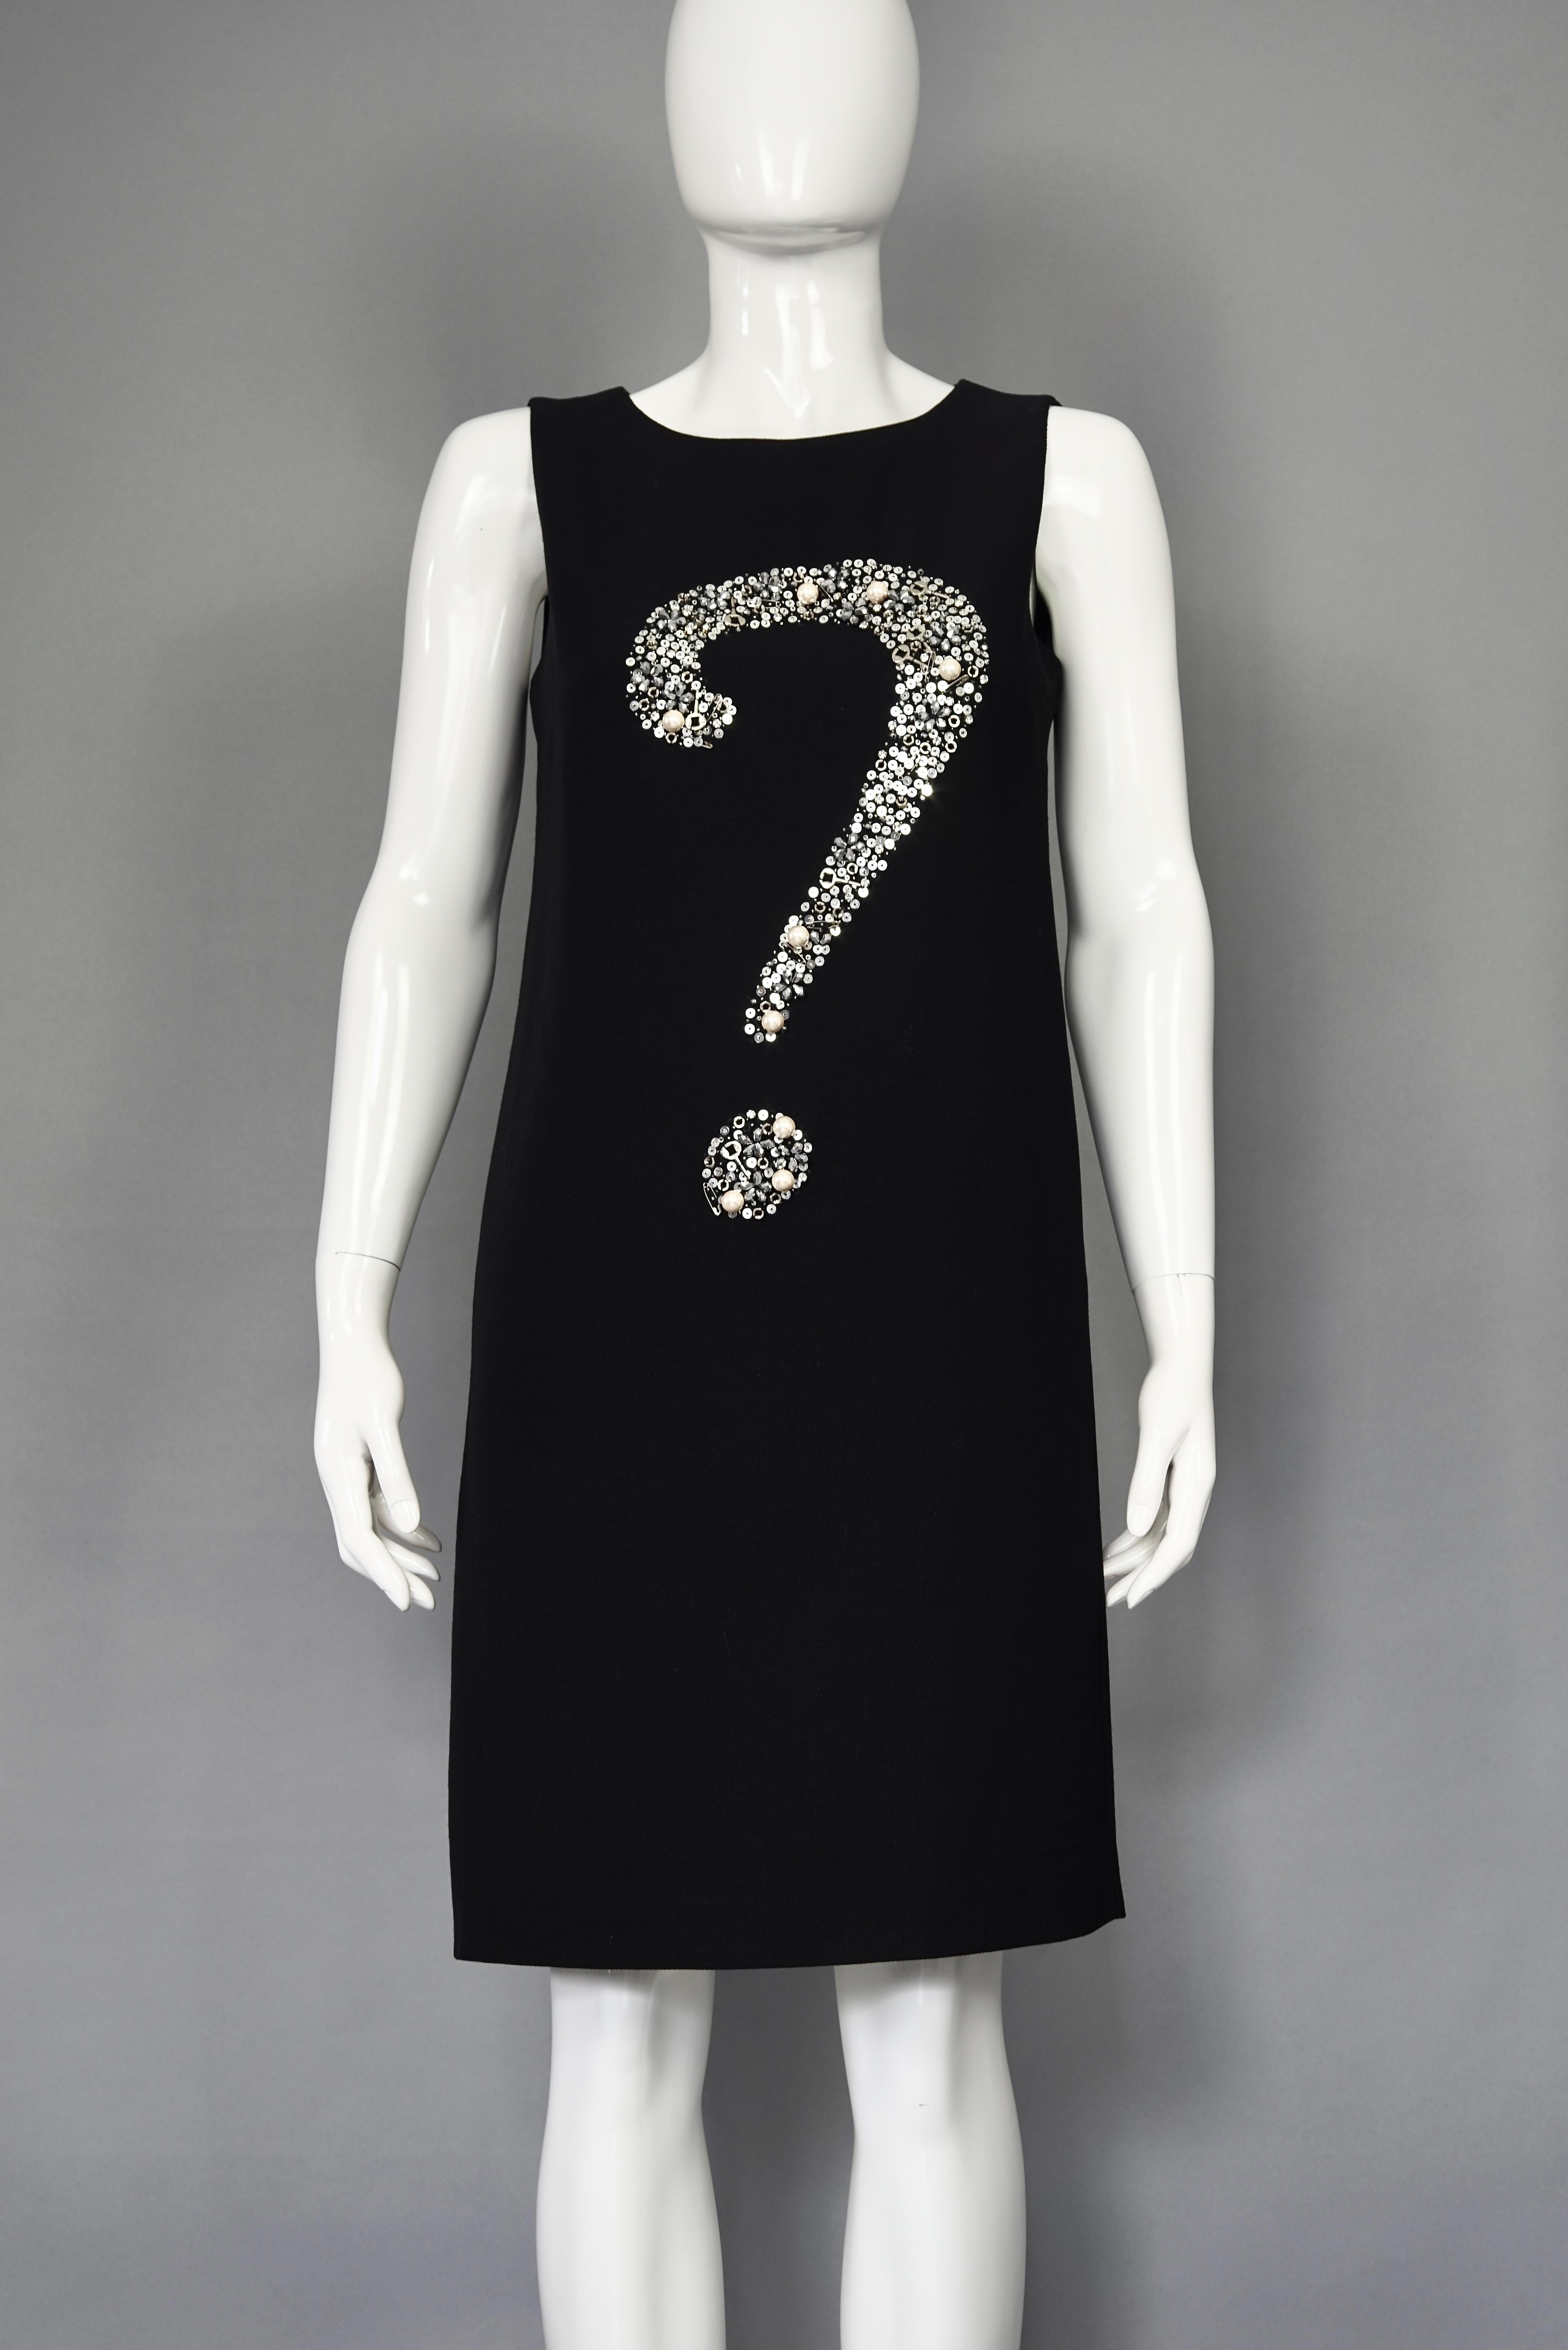 Iconic MOSCHINO Question Mark Embellished Dress

Measurements taken laid flat, please double bust, waist and hips:
Shoulder: 13.38 inches (34 cm)
Bust: 18.11 inches (46 cm)
Waist: 17.71 inches (45 cm)
Hips: 18.89 inches (48 cm)
Length: 36.61 inches